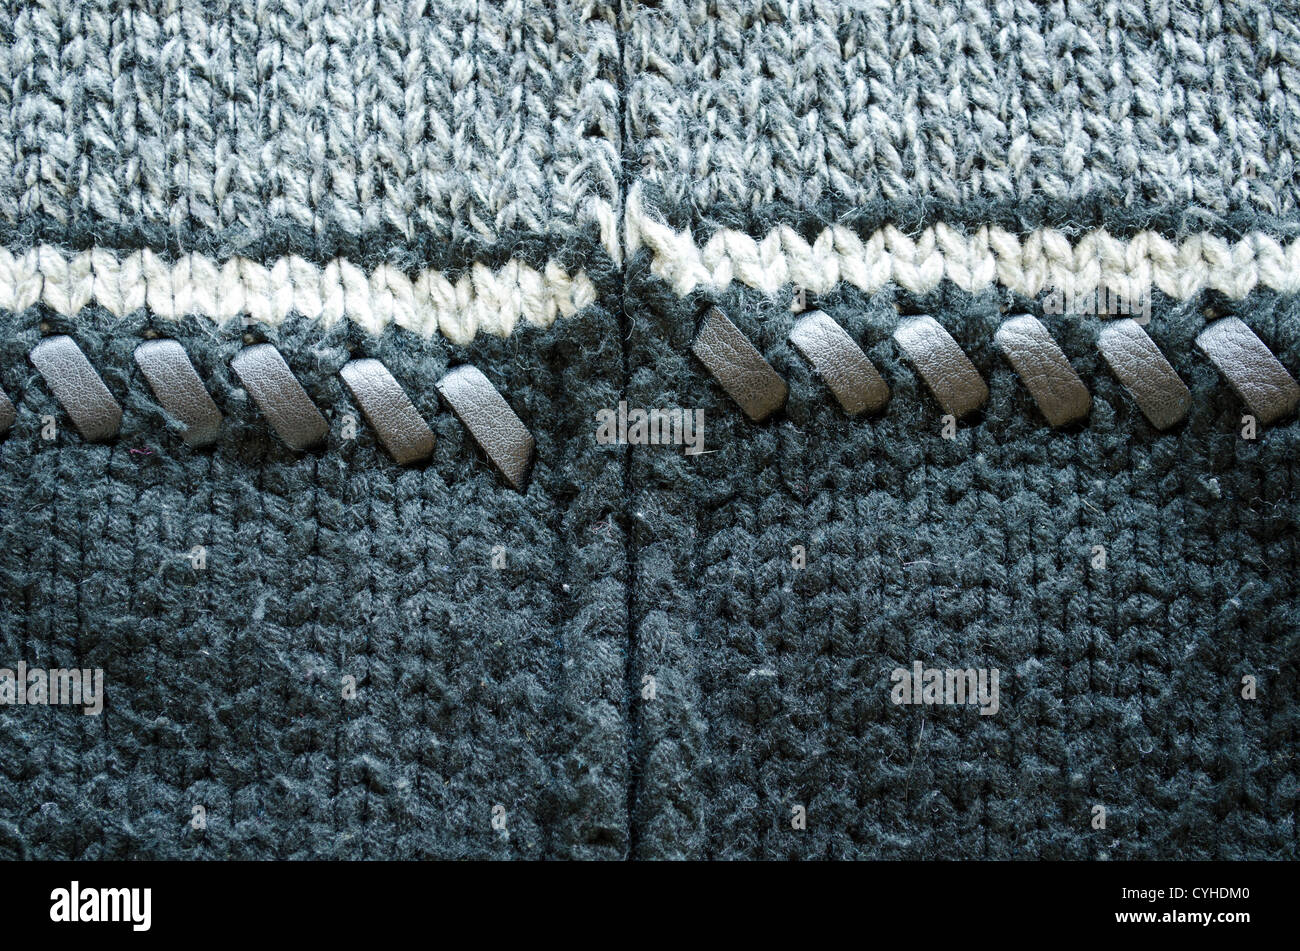 Closeup of wool knit sweater texture decorated with leather stitch. White grey and black colors background Stock Photo